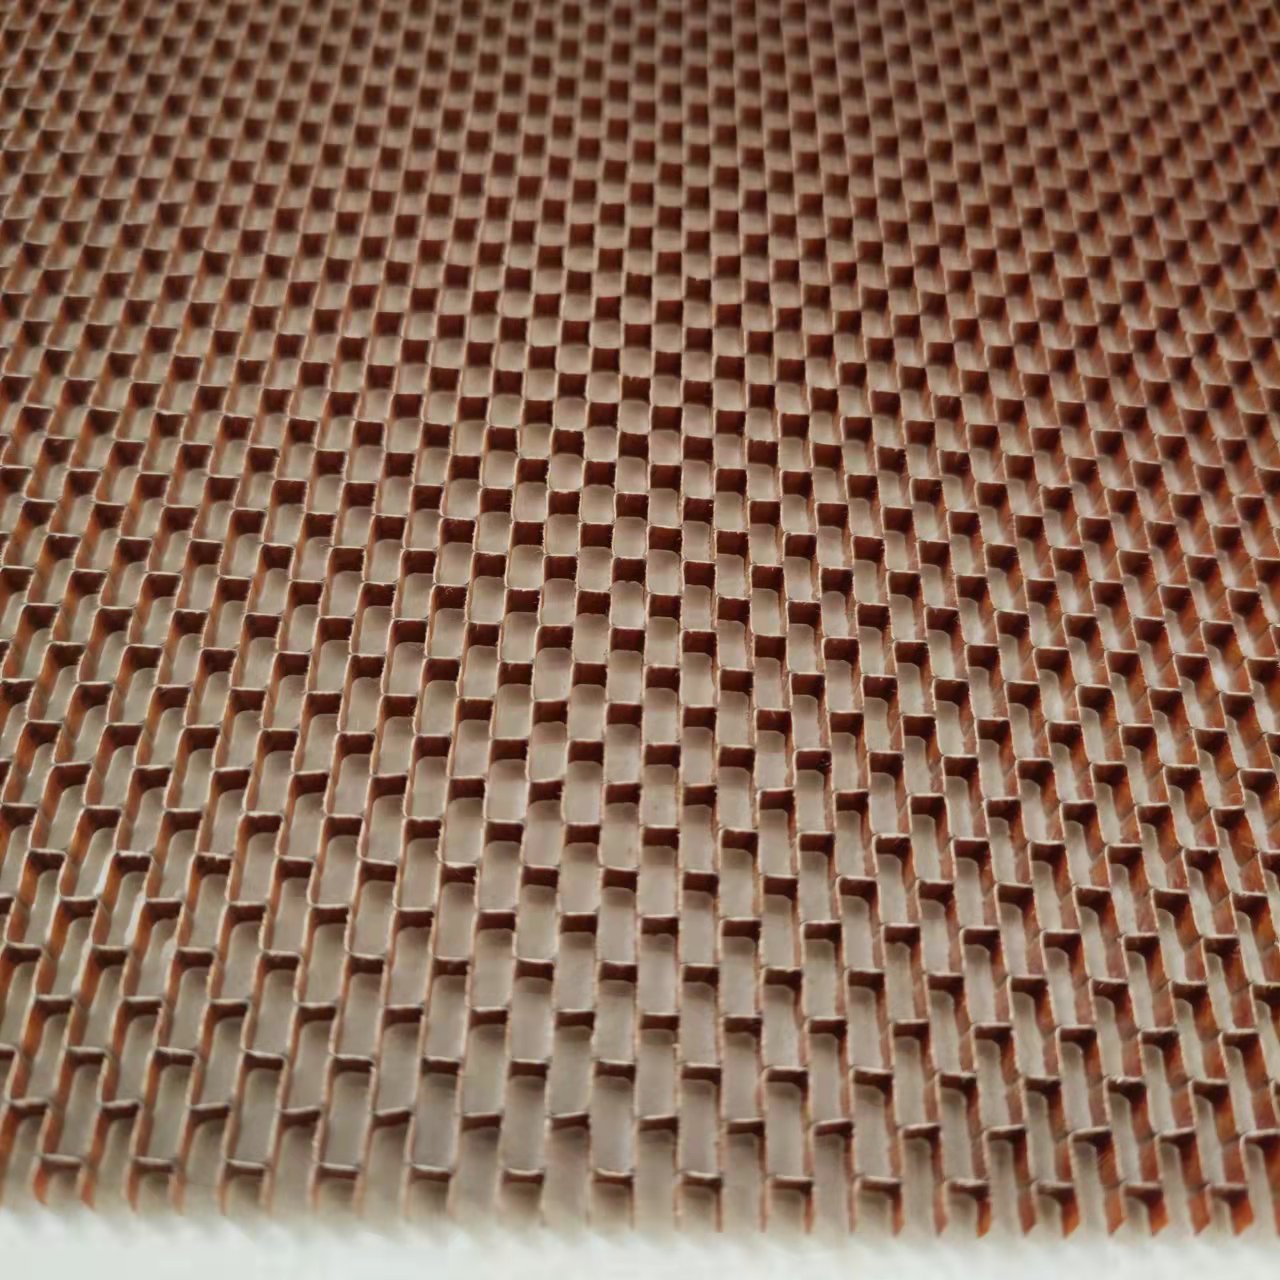 Over Expanded Aramid Honeycomb Core For Sandwich Panels